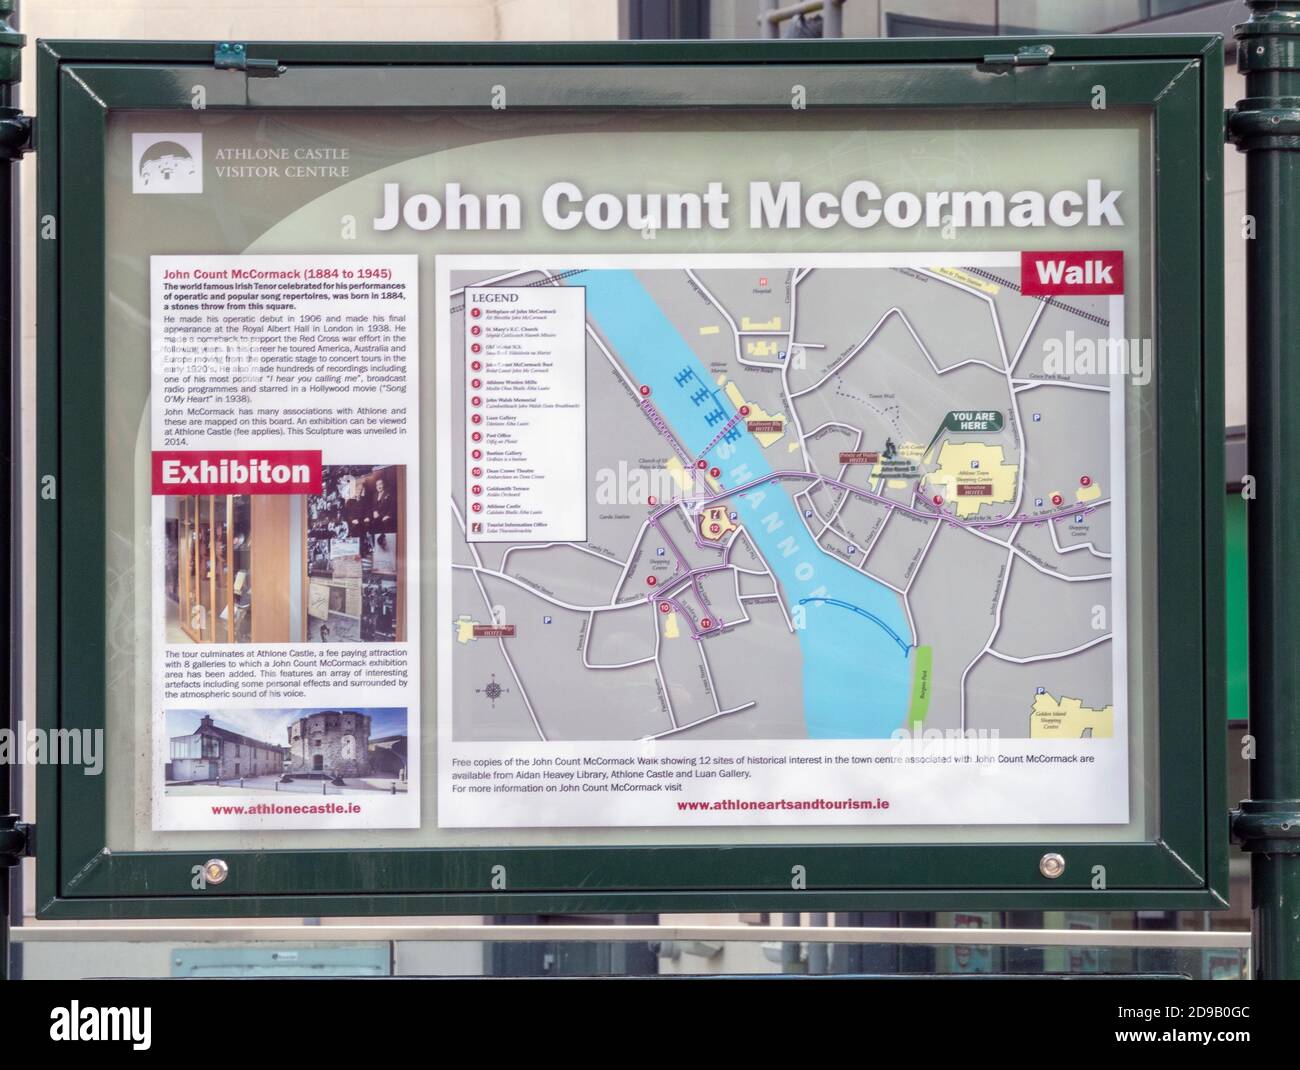 Public information board for tourist in the town of Athlone, Co Westmeath Ireland about John Count McCormack. Stock Photo